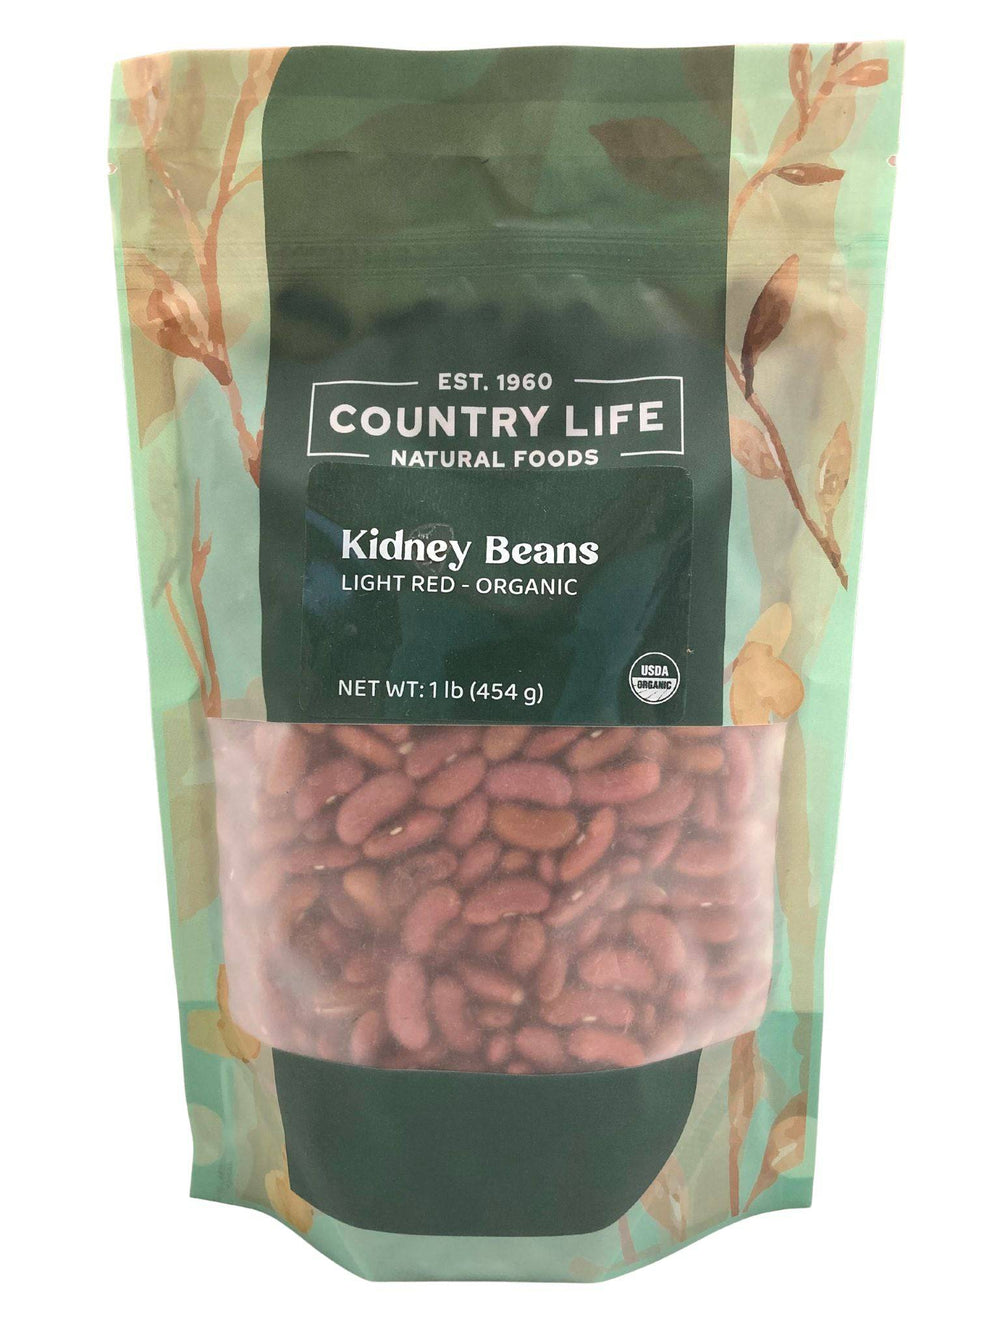 Organic Kidney Beans, Light Red - Country Life Natural Foods